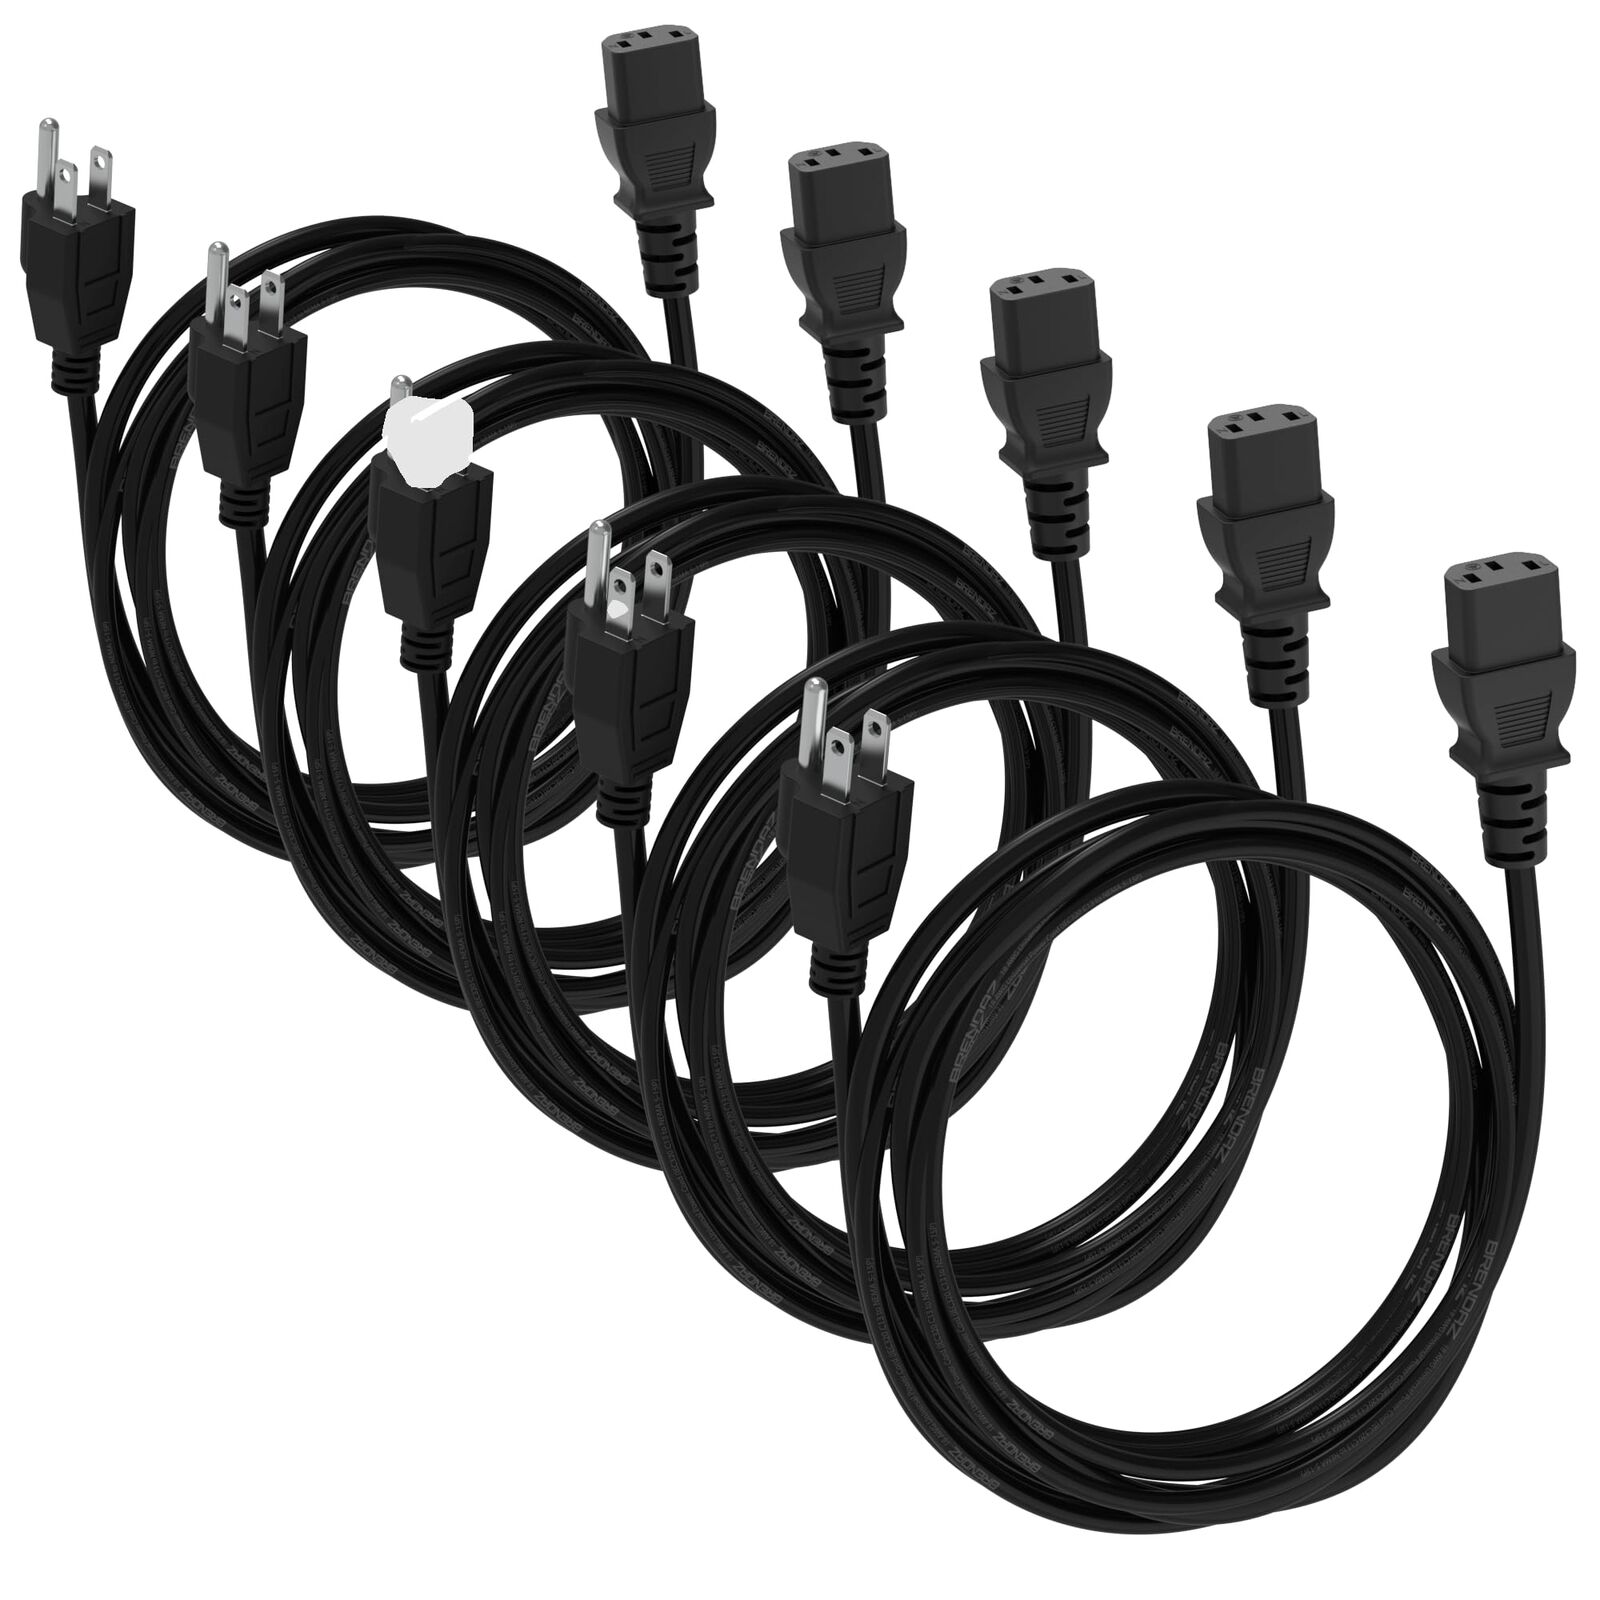 5-Pack Universal Power Cord Power Cable for Computer Monitor TV Printer Scann...